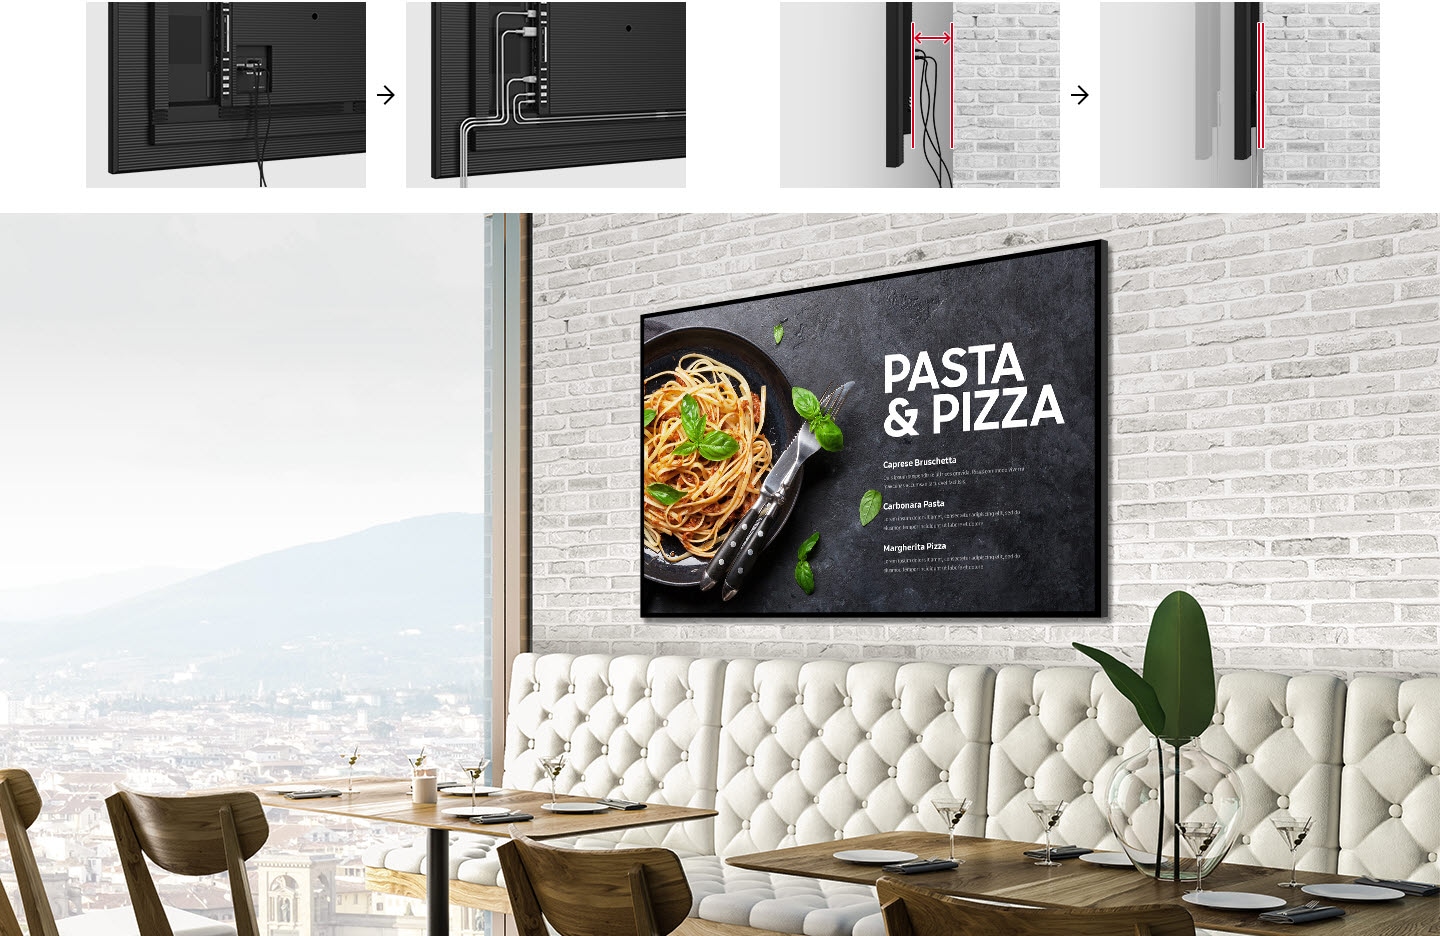 Compared to existing products, the QHB product has a cleaner rear line arrangement and a reduced installation distance from the wall. In QHB, the product and the wall are closely attached, and the cables are not exposed. The menu board is displayed on QHB on the wall of a restaurant.